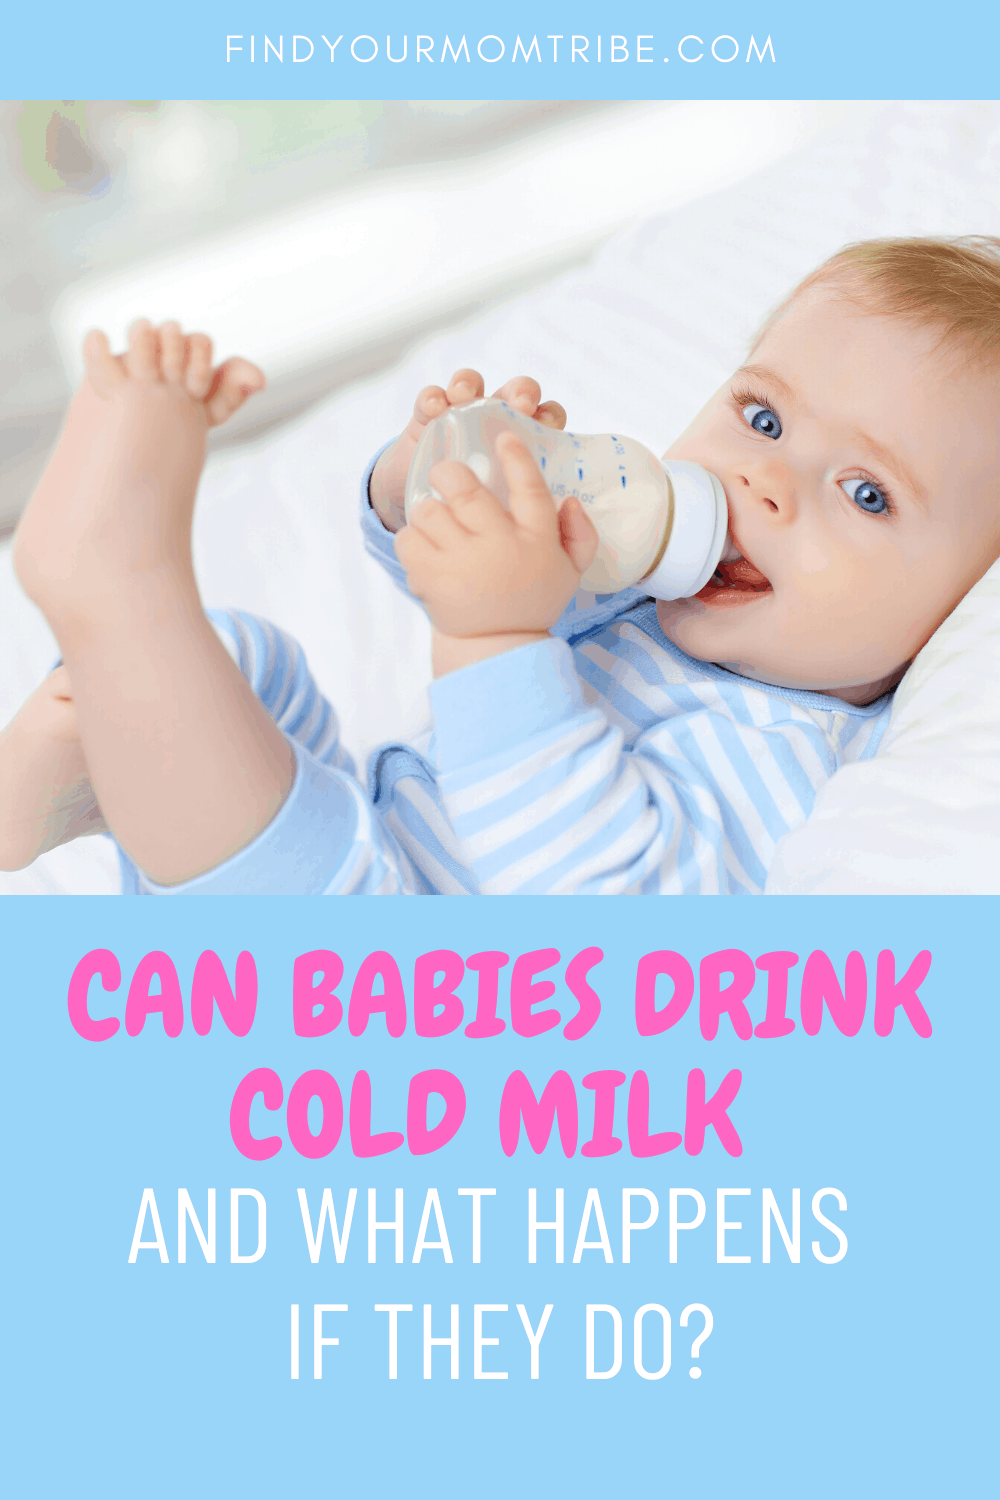 Pinterest can babies drink cold milk